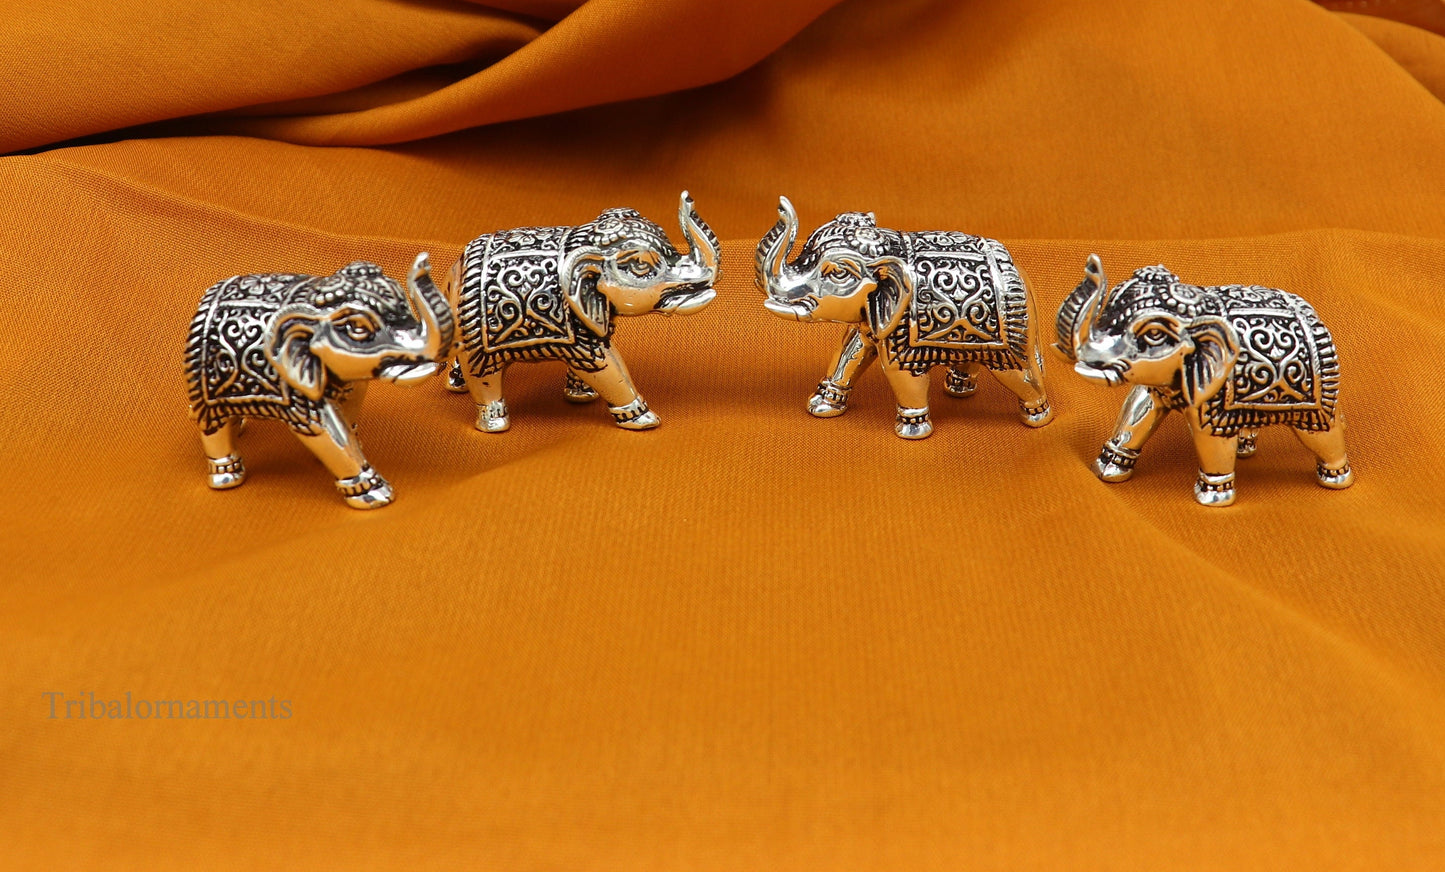 Pure 925 Sterling silver kandrai work nakshi design customized Elephant statue, puja article figurine, home décor puja articles su489 - TRIBAL ORNAMENTS